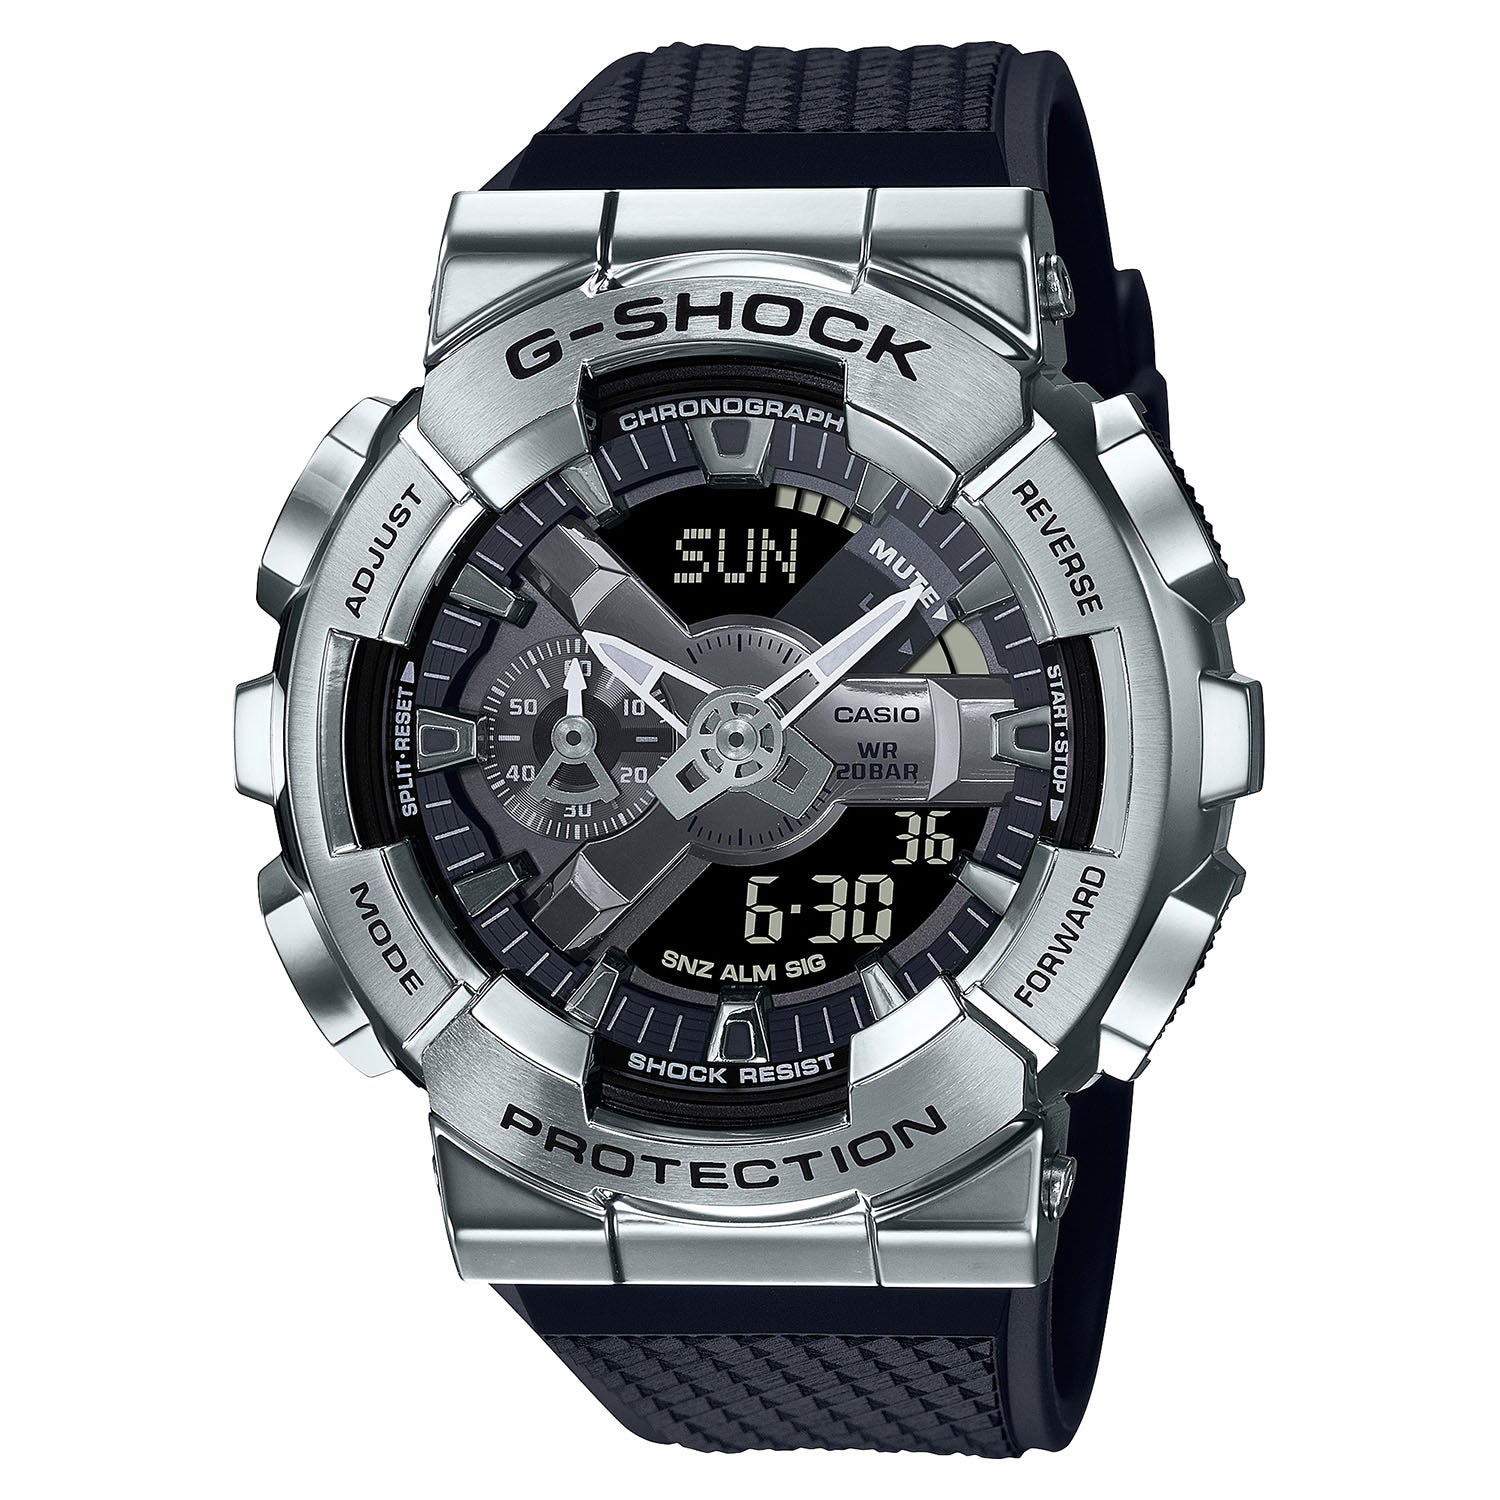 CASIO】G-SHOCK GM-110シリーズ / Metal Coveredライン / GM-110-1AJF – CAR and DRIVER  collection